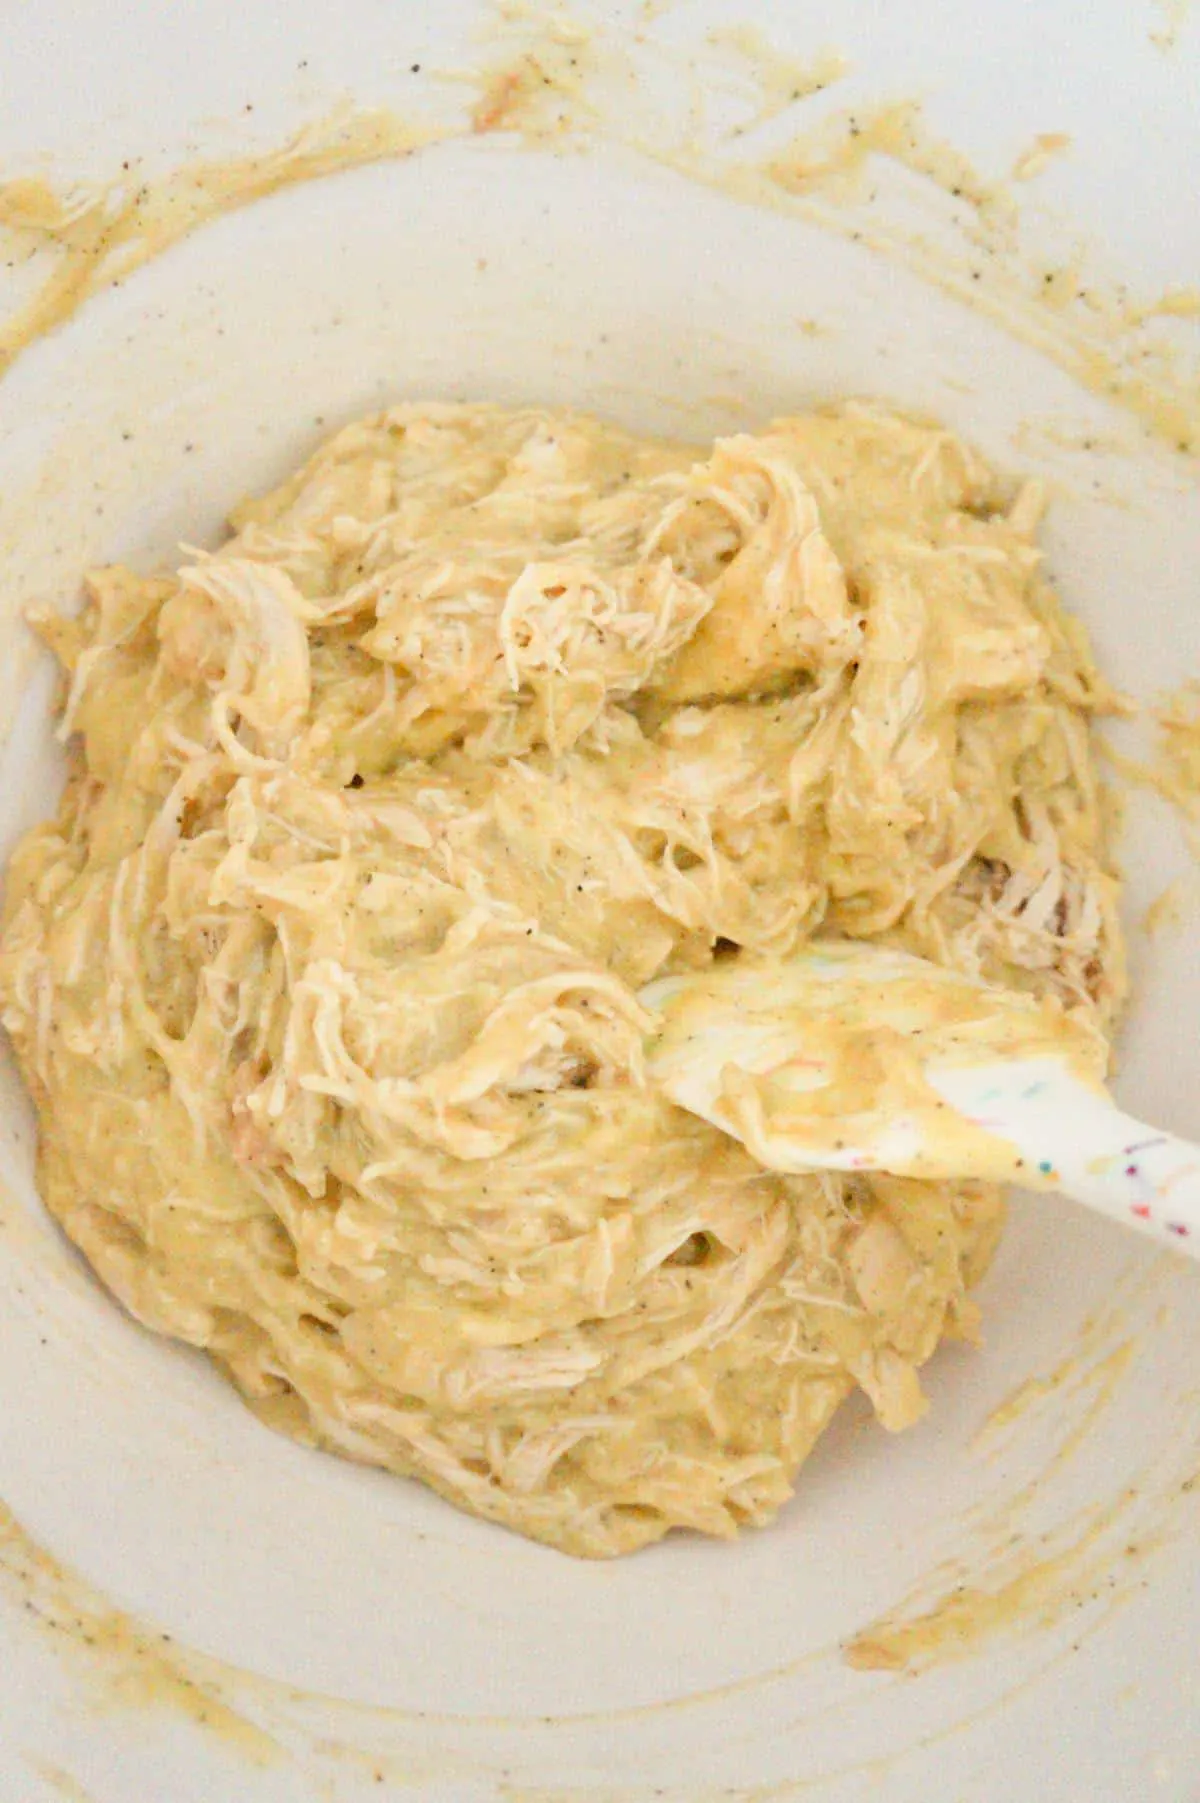 shredded chicken and cream of chicken soup mixture in a mixing bowl